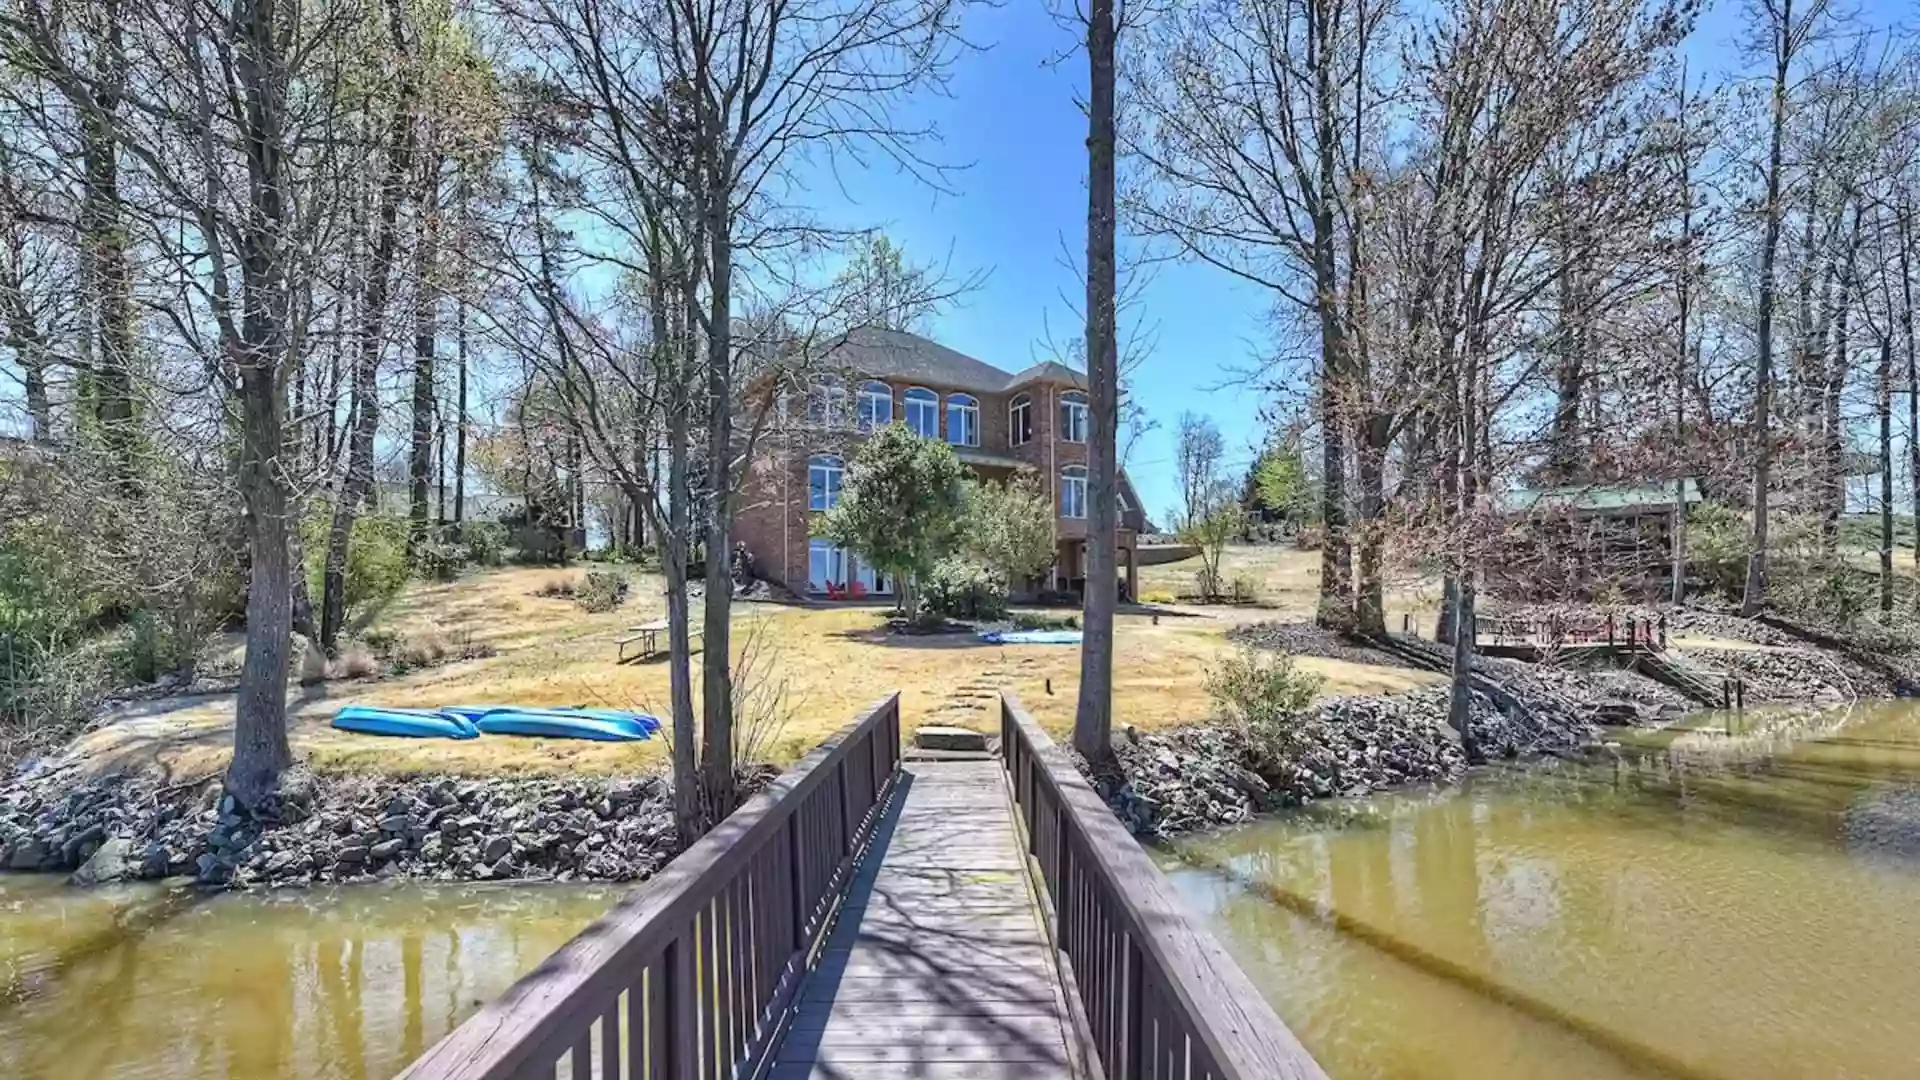 Lakecations - Flip Flop Therapy - Lake Norman Vacation Rental